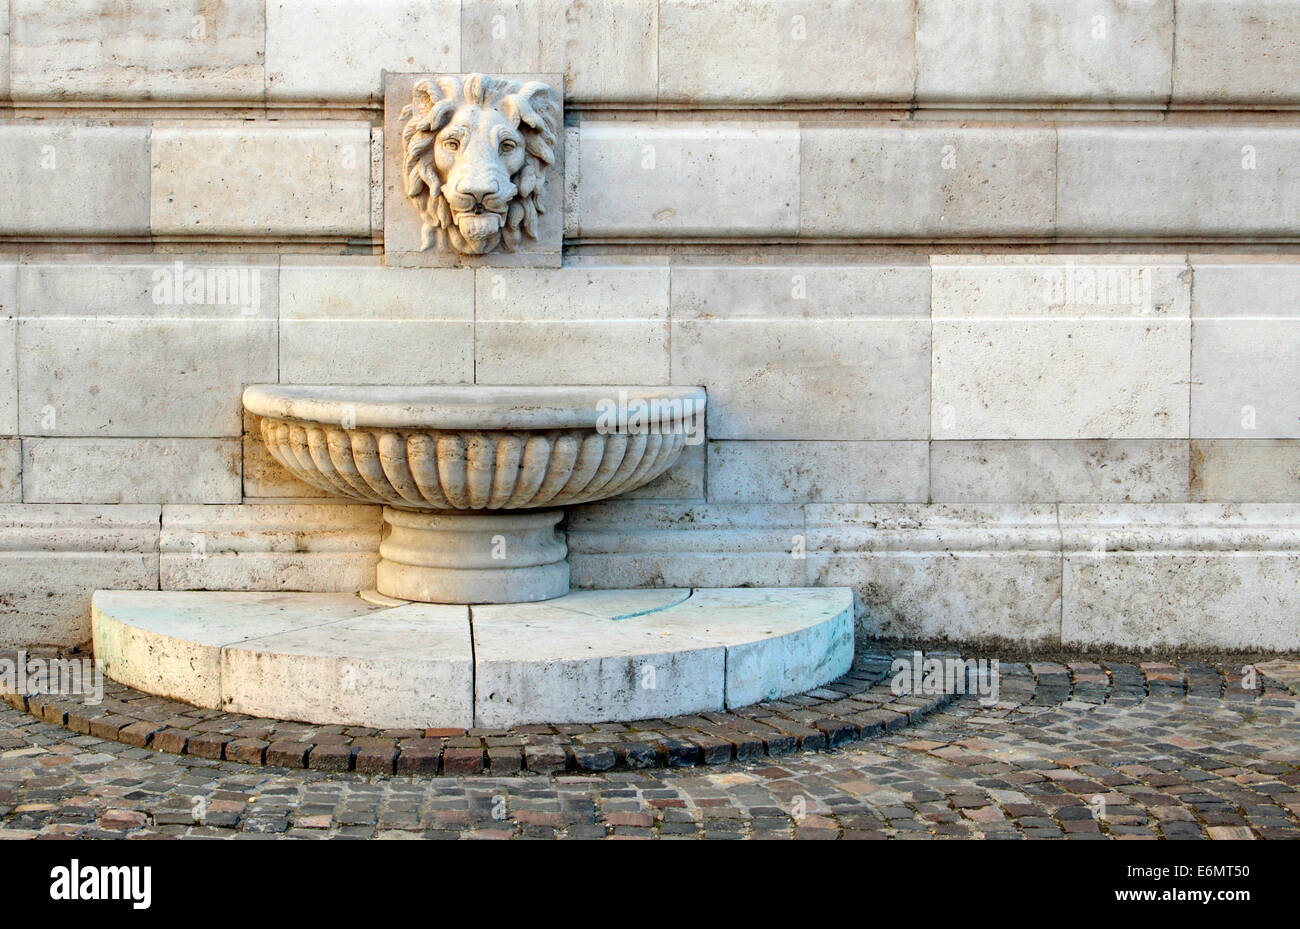 Old medieval wall fountain statue of a lion. Stock Photo